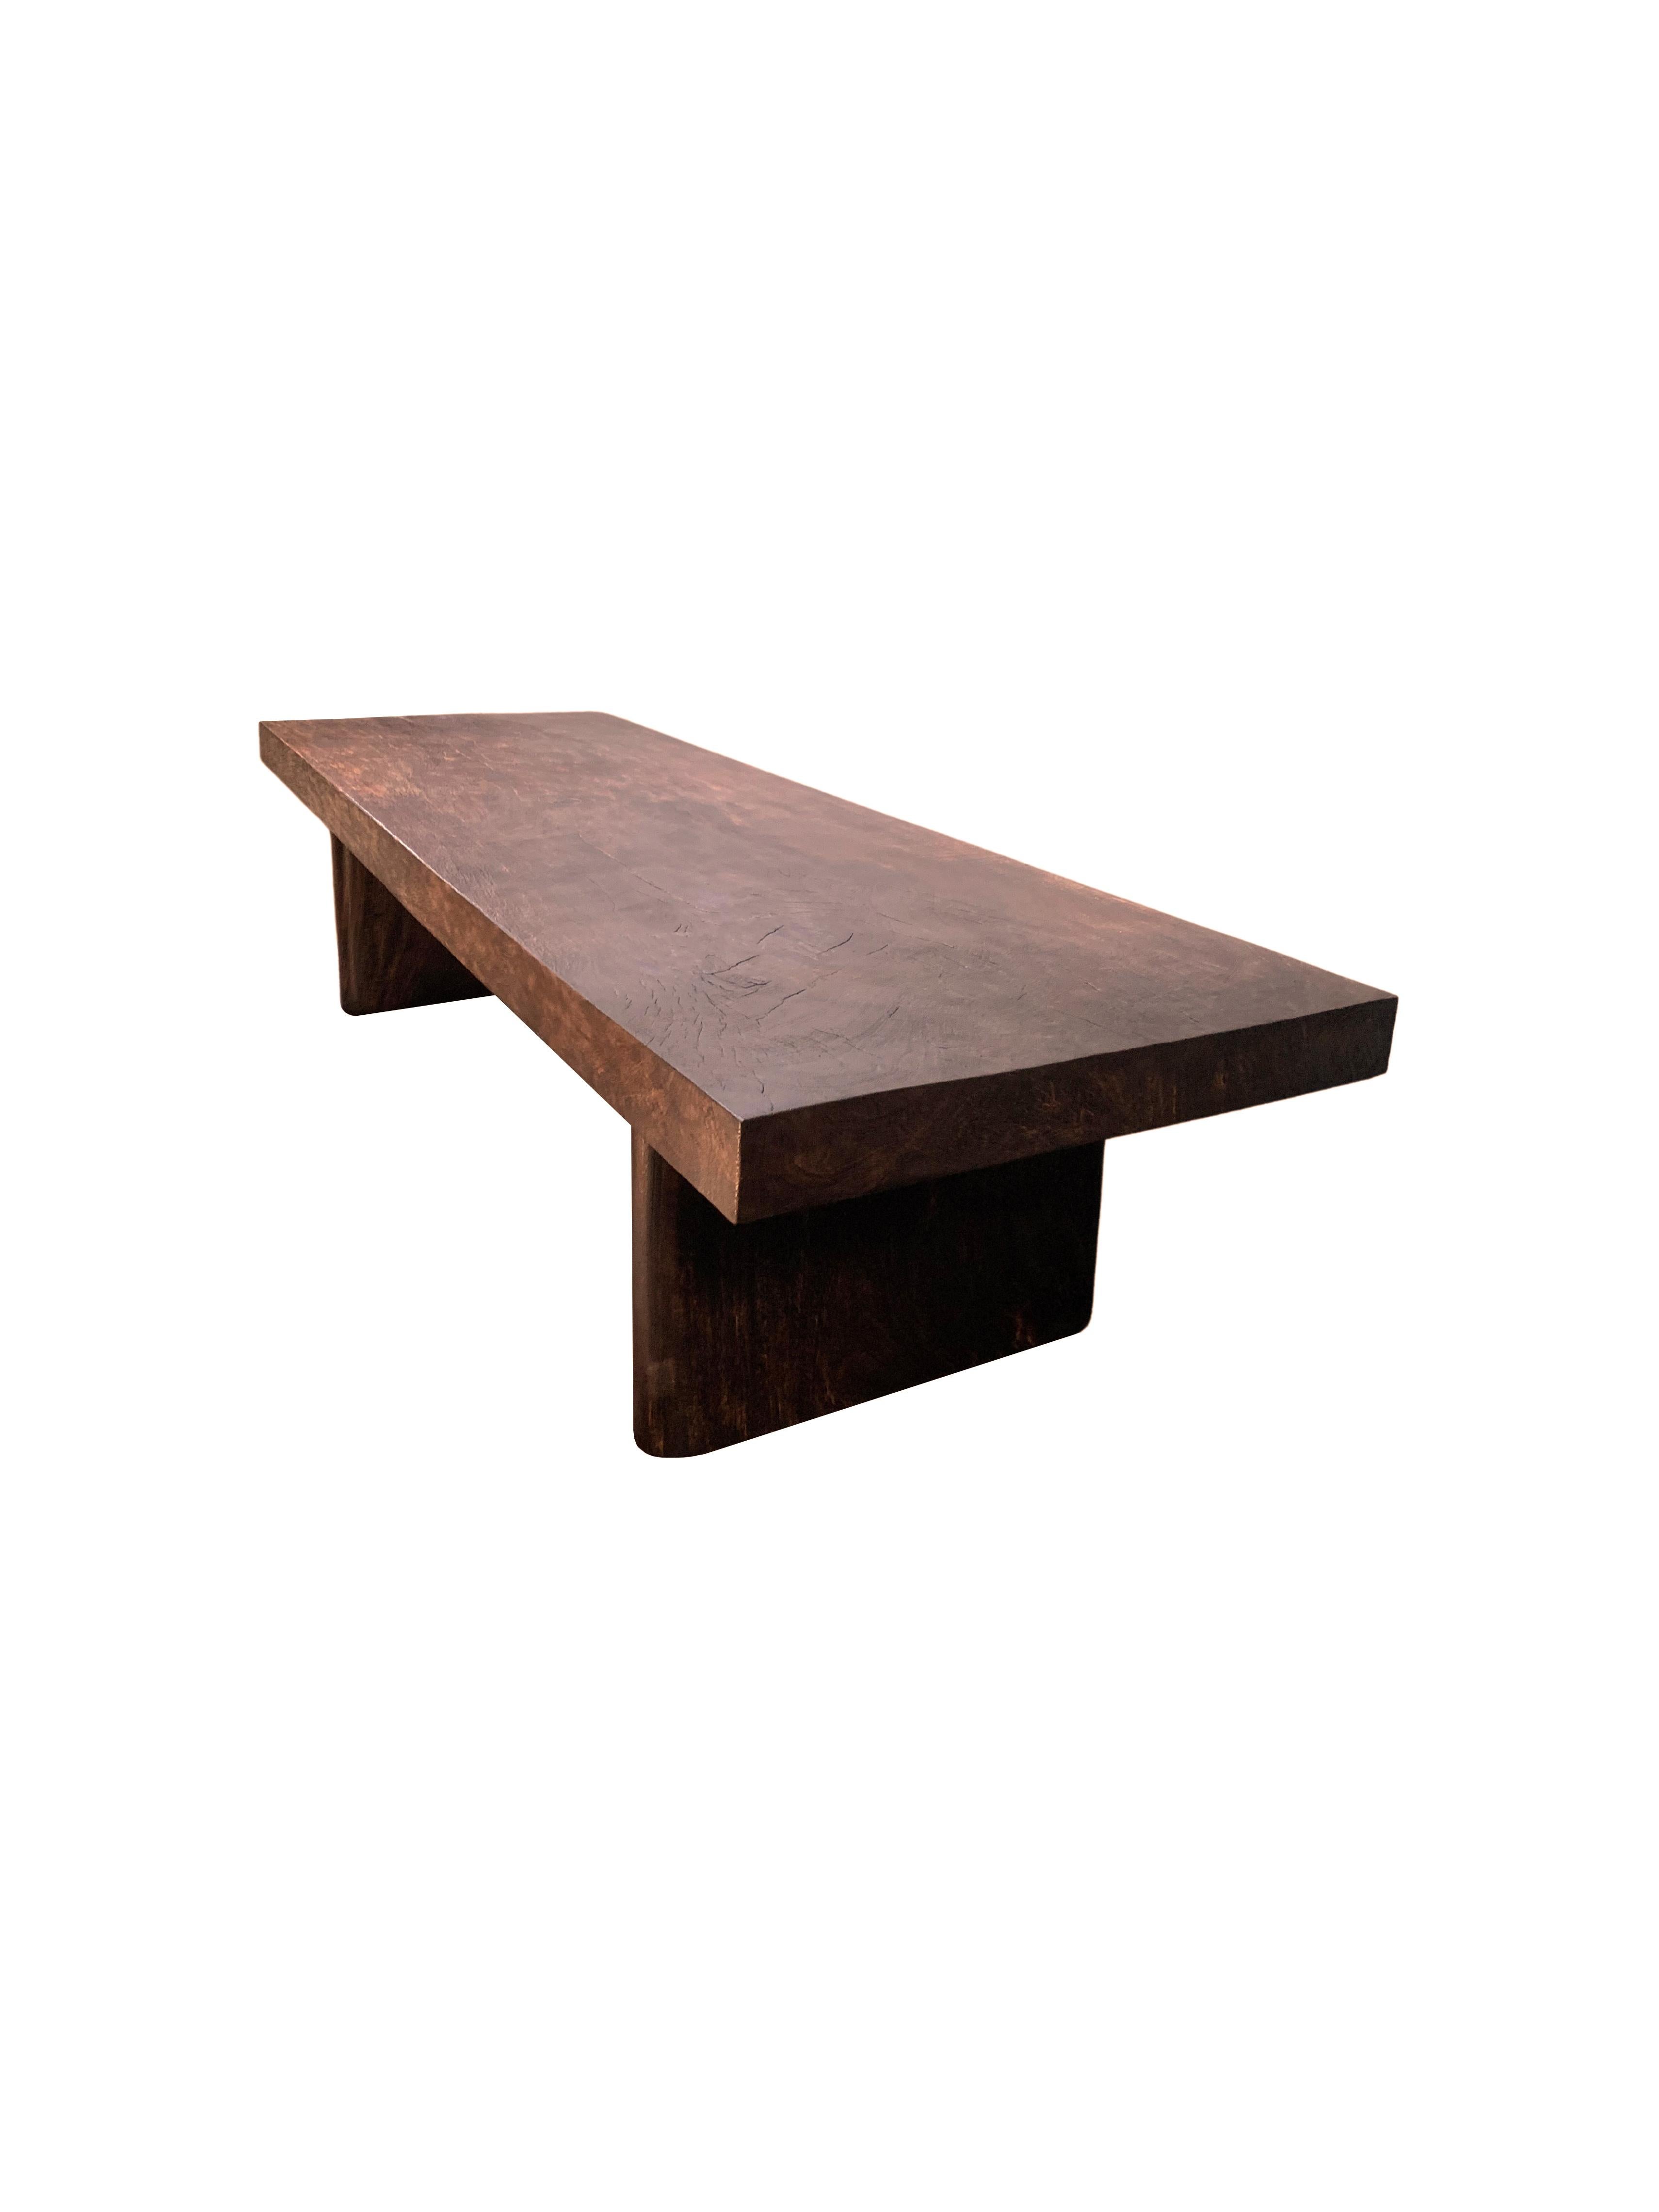 A solid mango wood sofa table with wonderful wood textures and shades. The table top is crafted from a soild slab of mango wood. The table also features two soild legs that span its width and feature curved sides. A wonderfully sculptural object,